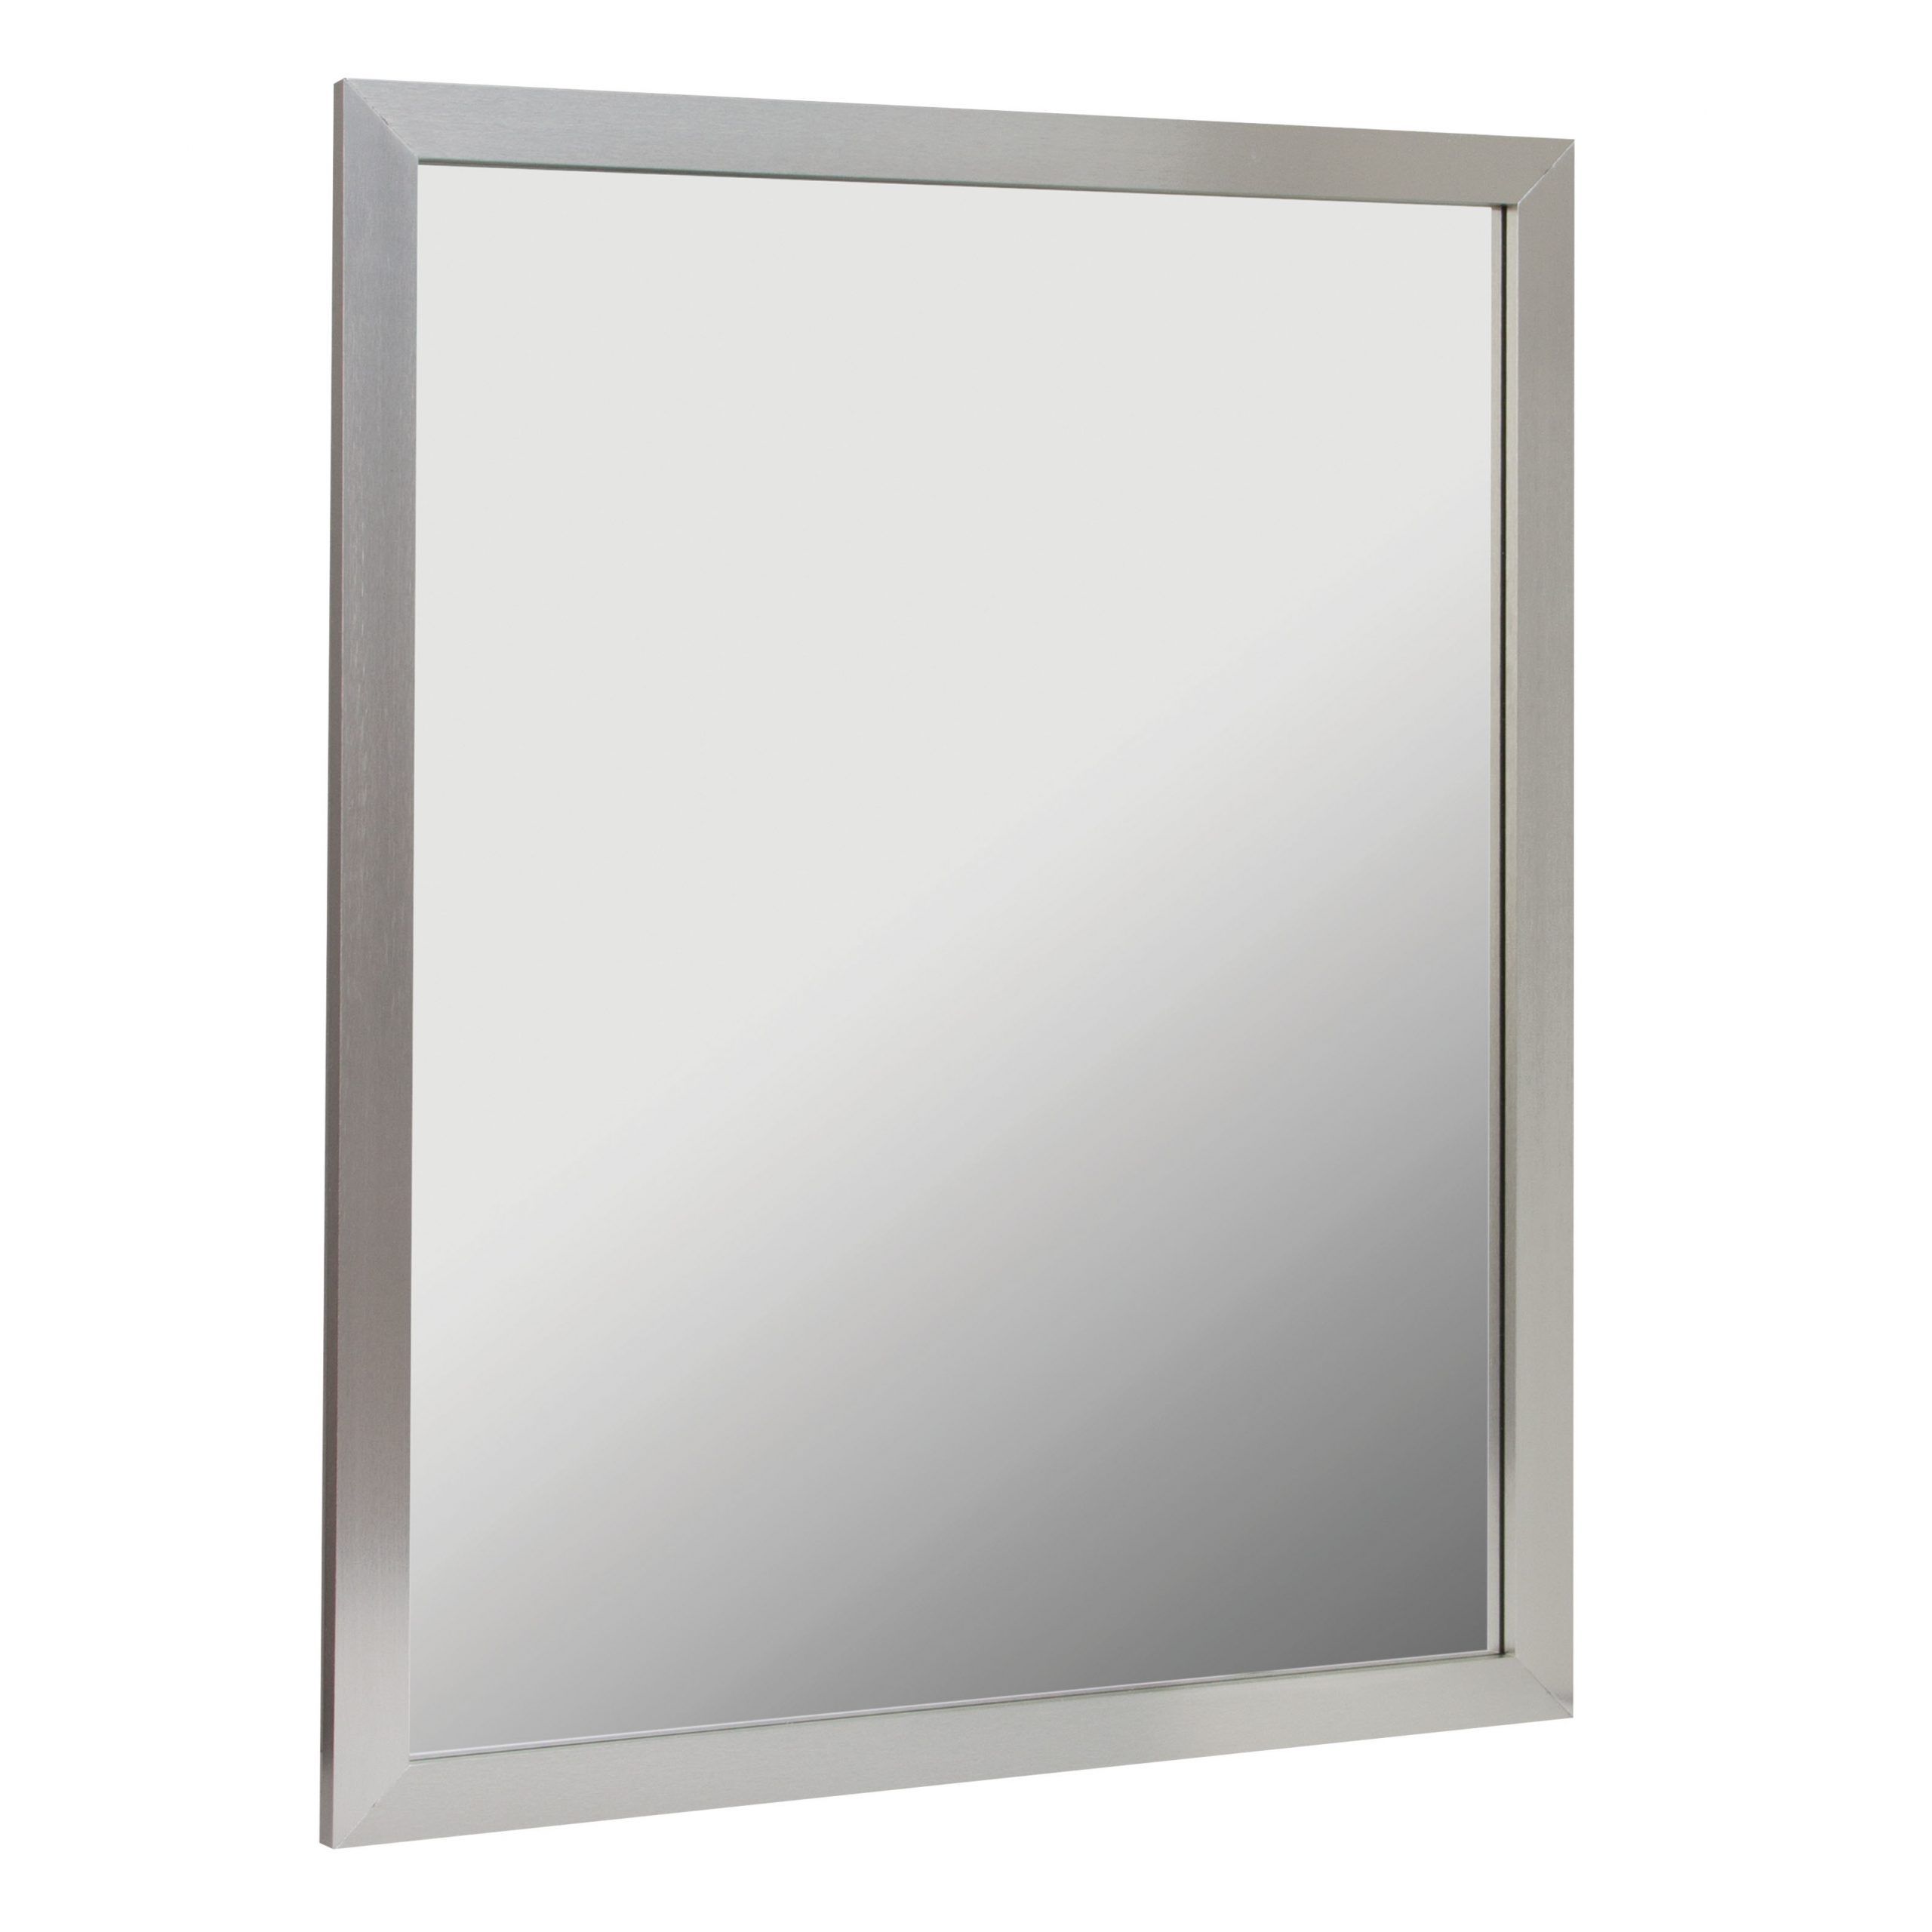 30X36 Aluminum Framed Mirror In Brushed Nickel – Foremost Bath Regarding Brushed Nickel Octagon Mirrors (View 4 of 15)